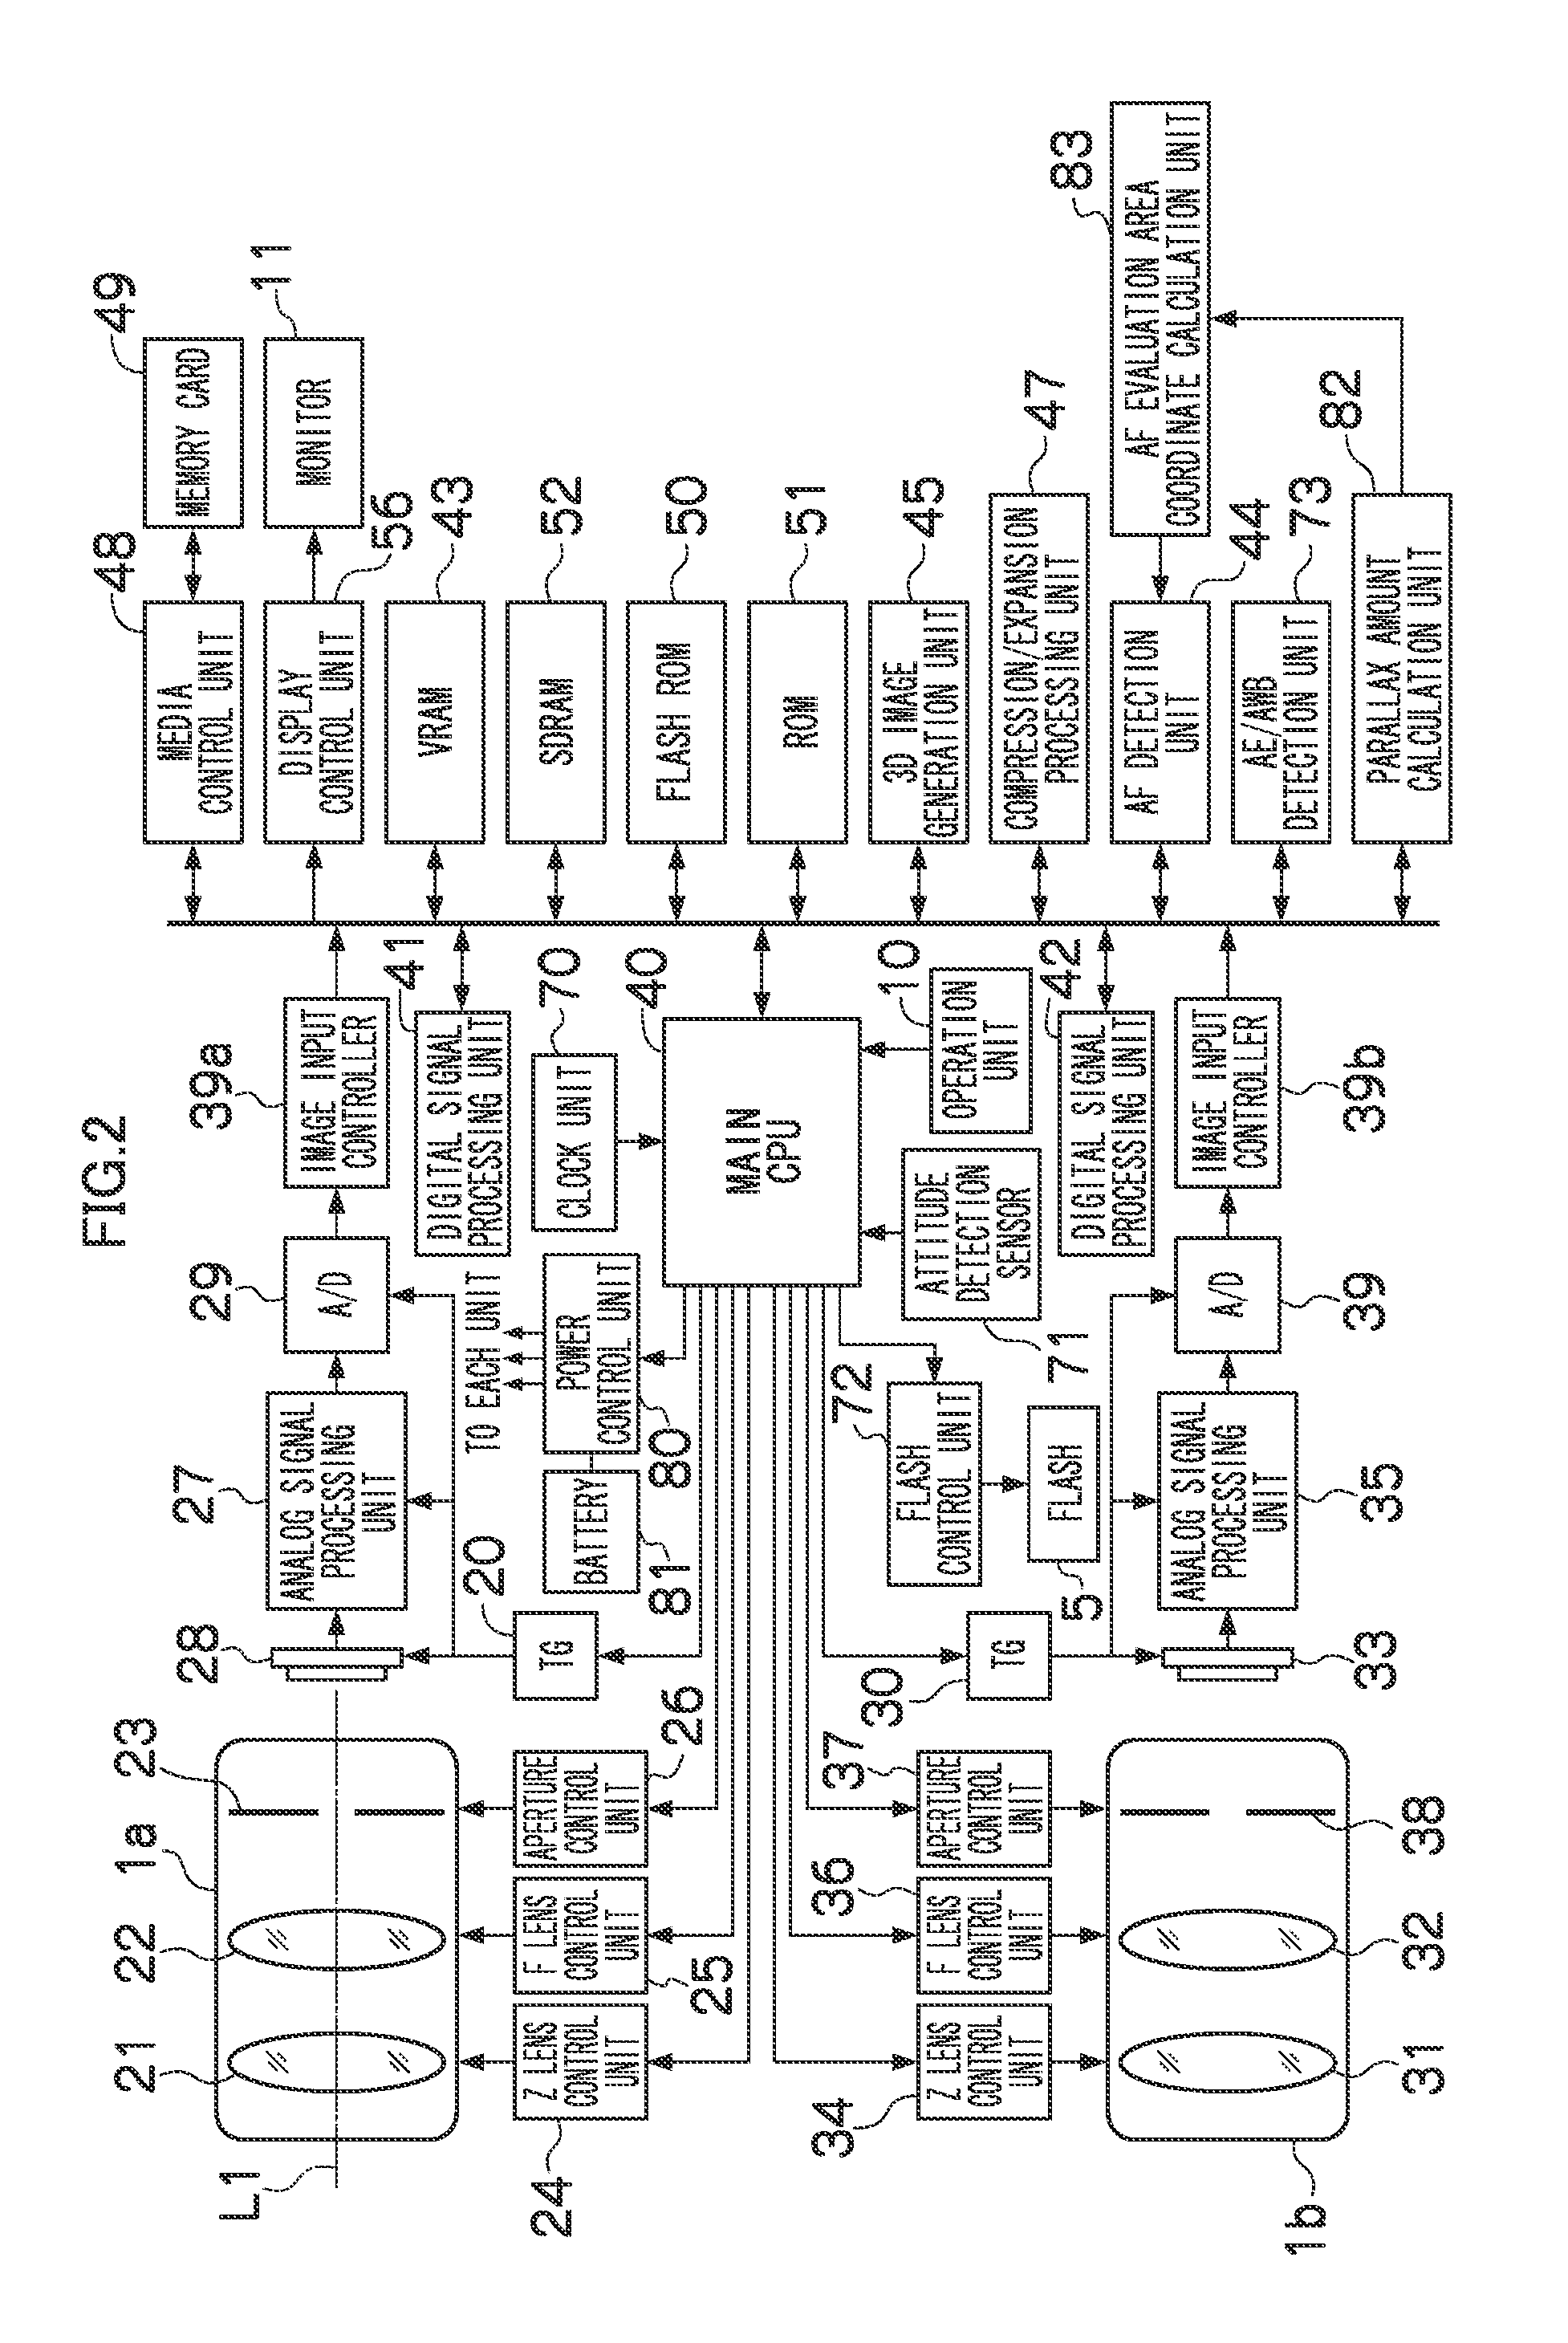 Imaging device, imaging method and recording medium for adjusting imaging conditions of optical systems based on viewpoint images